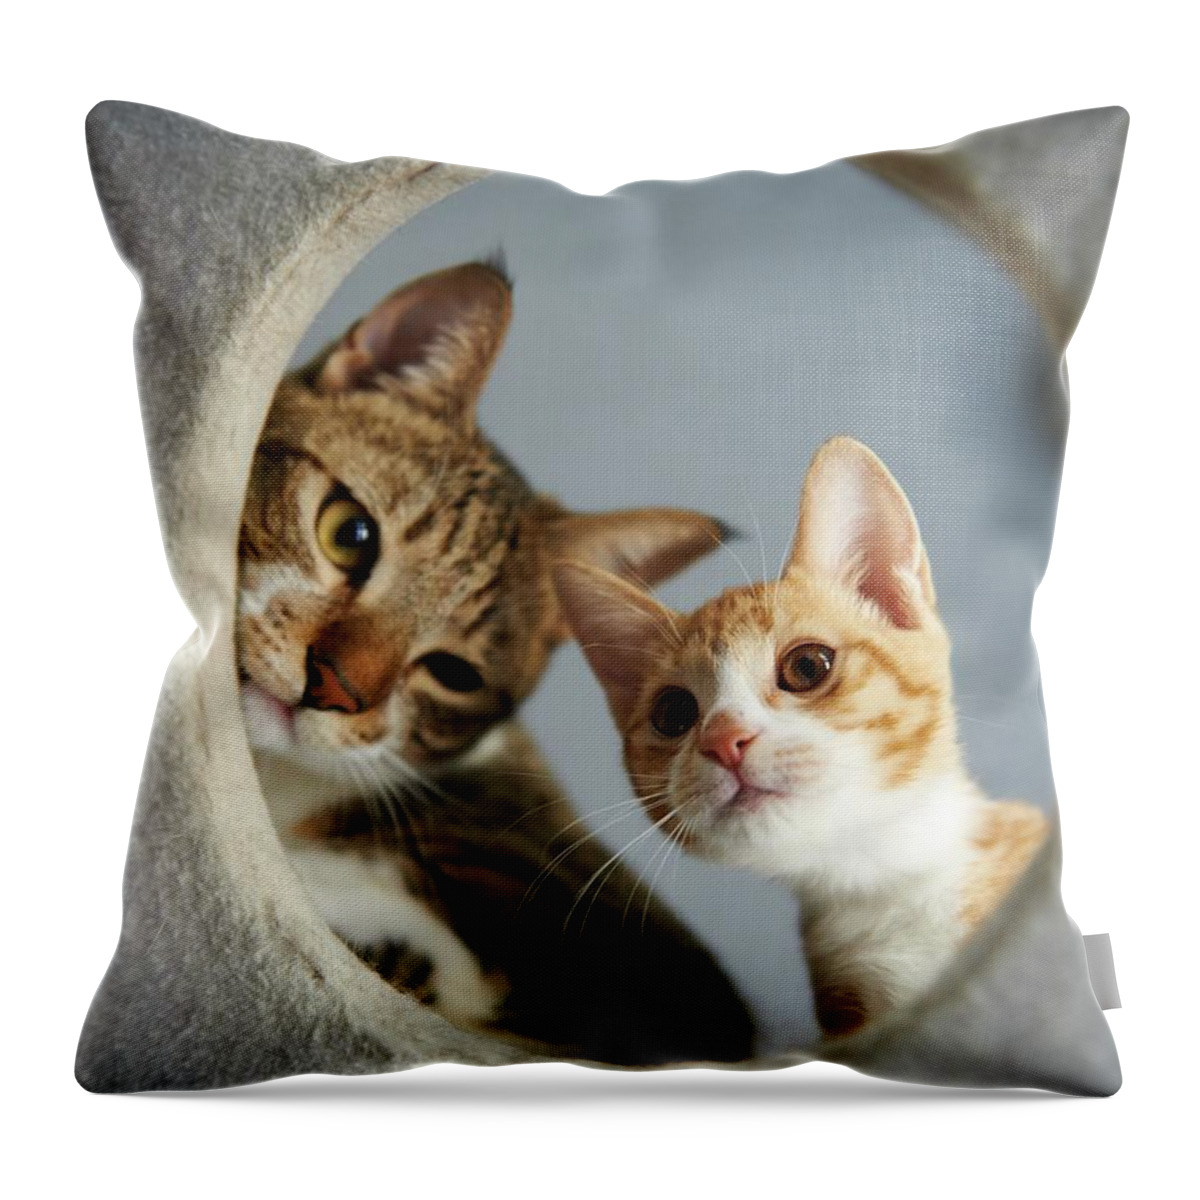 Pets Throw Pillow featuring the photograph Two Cats by Akimasa Harada